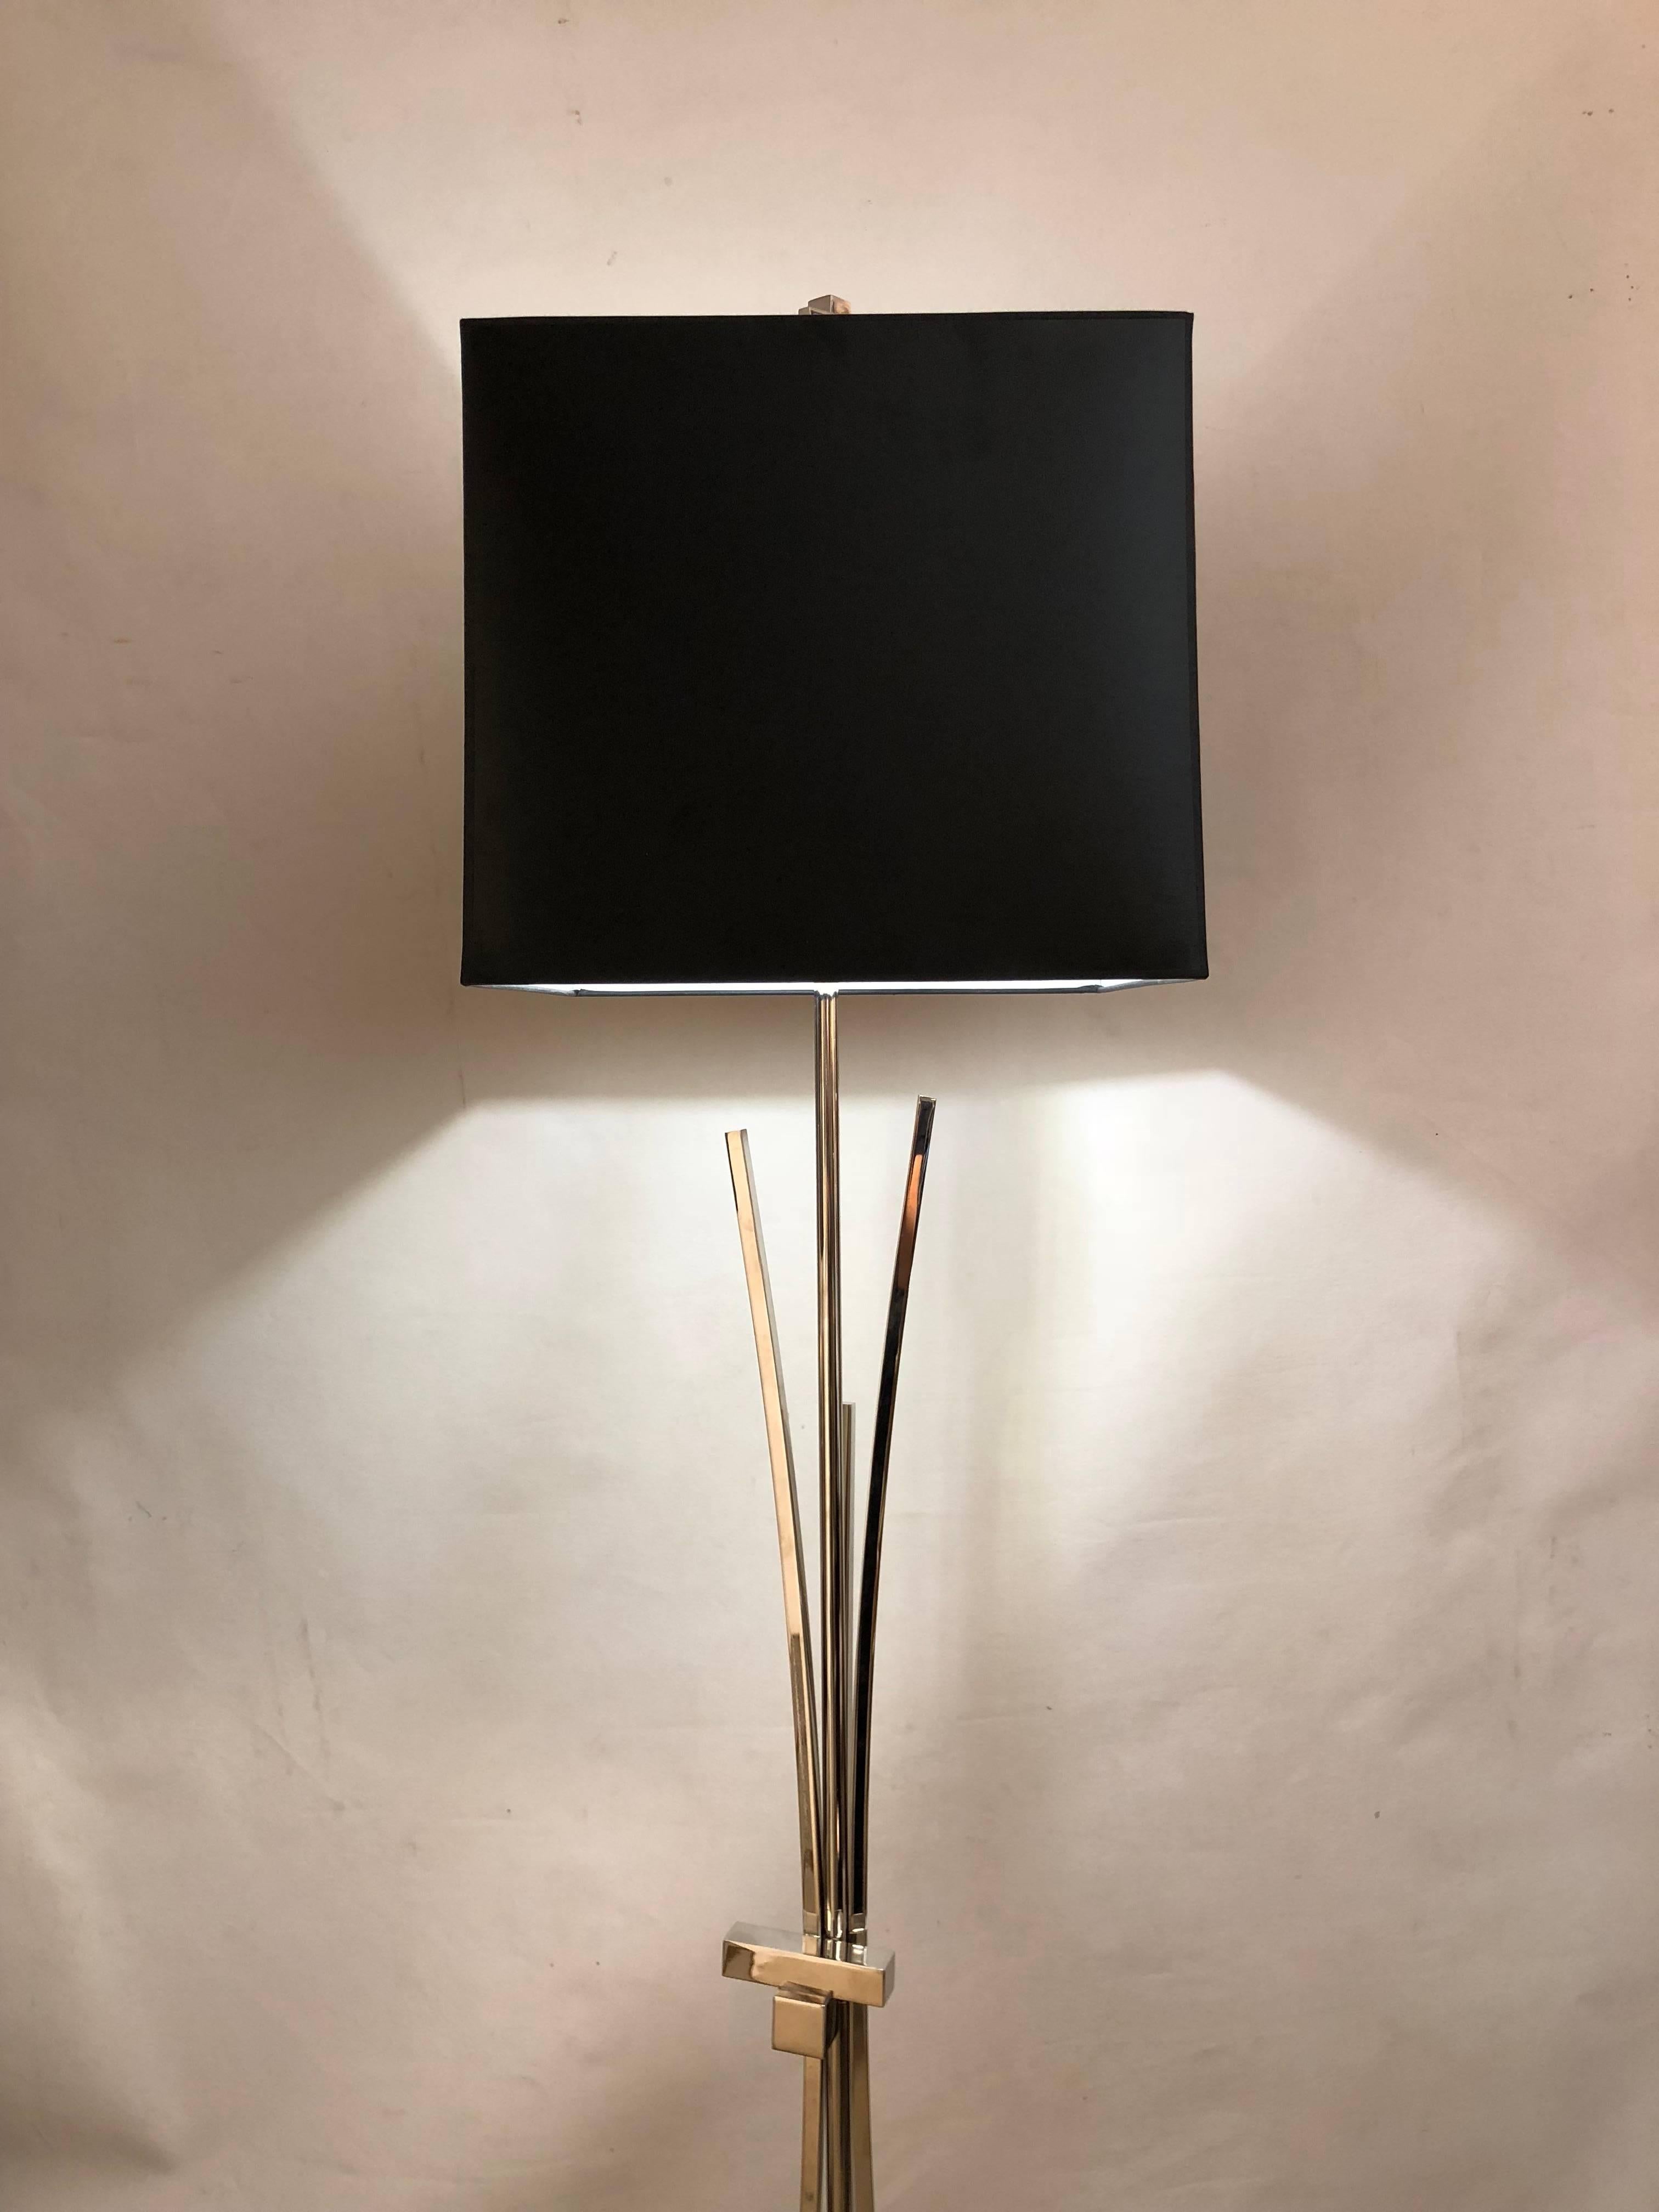 Hand-Crafted Contemporary Bespoke Italian Abstract Design Meccano Nickel Floor Lamp For Sale